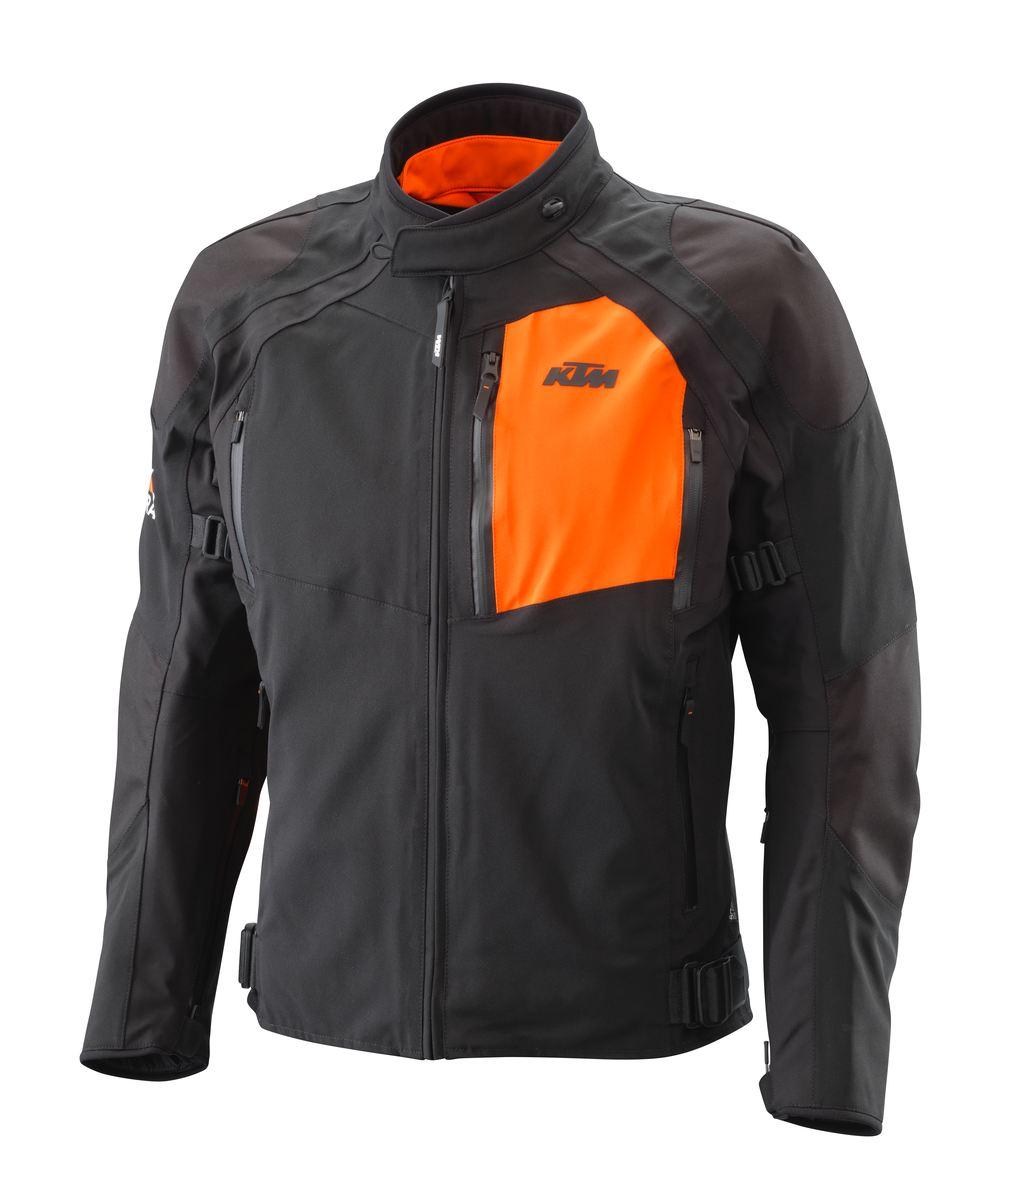 KTM Tension Leather Jacket 3PW22000080X|Chester KTM